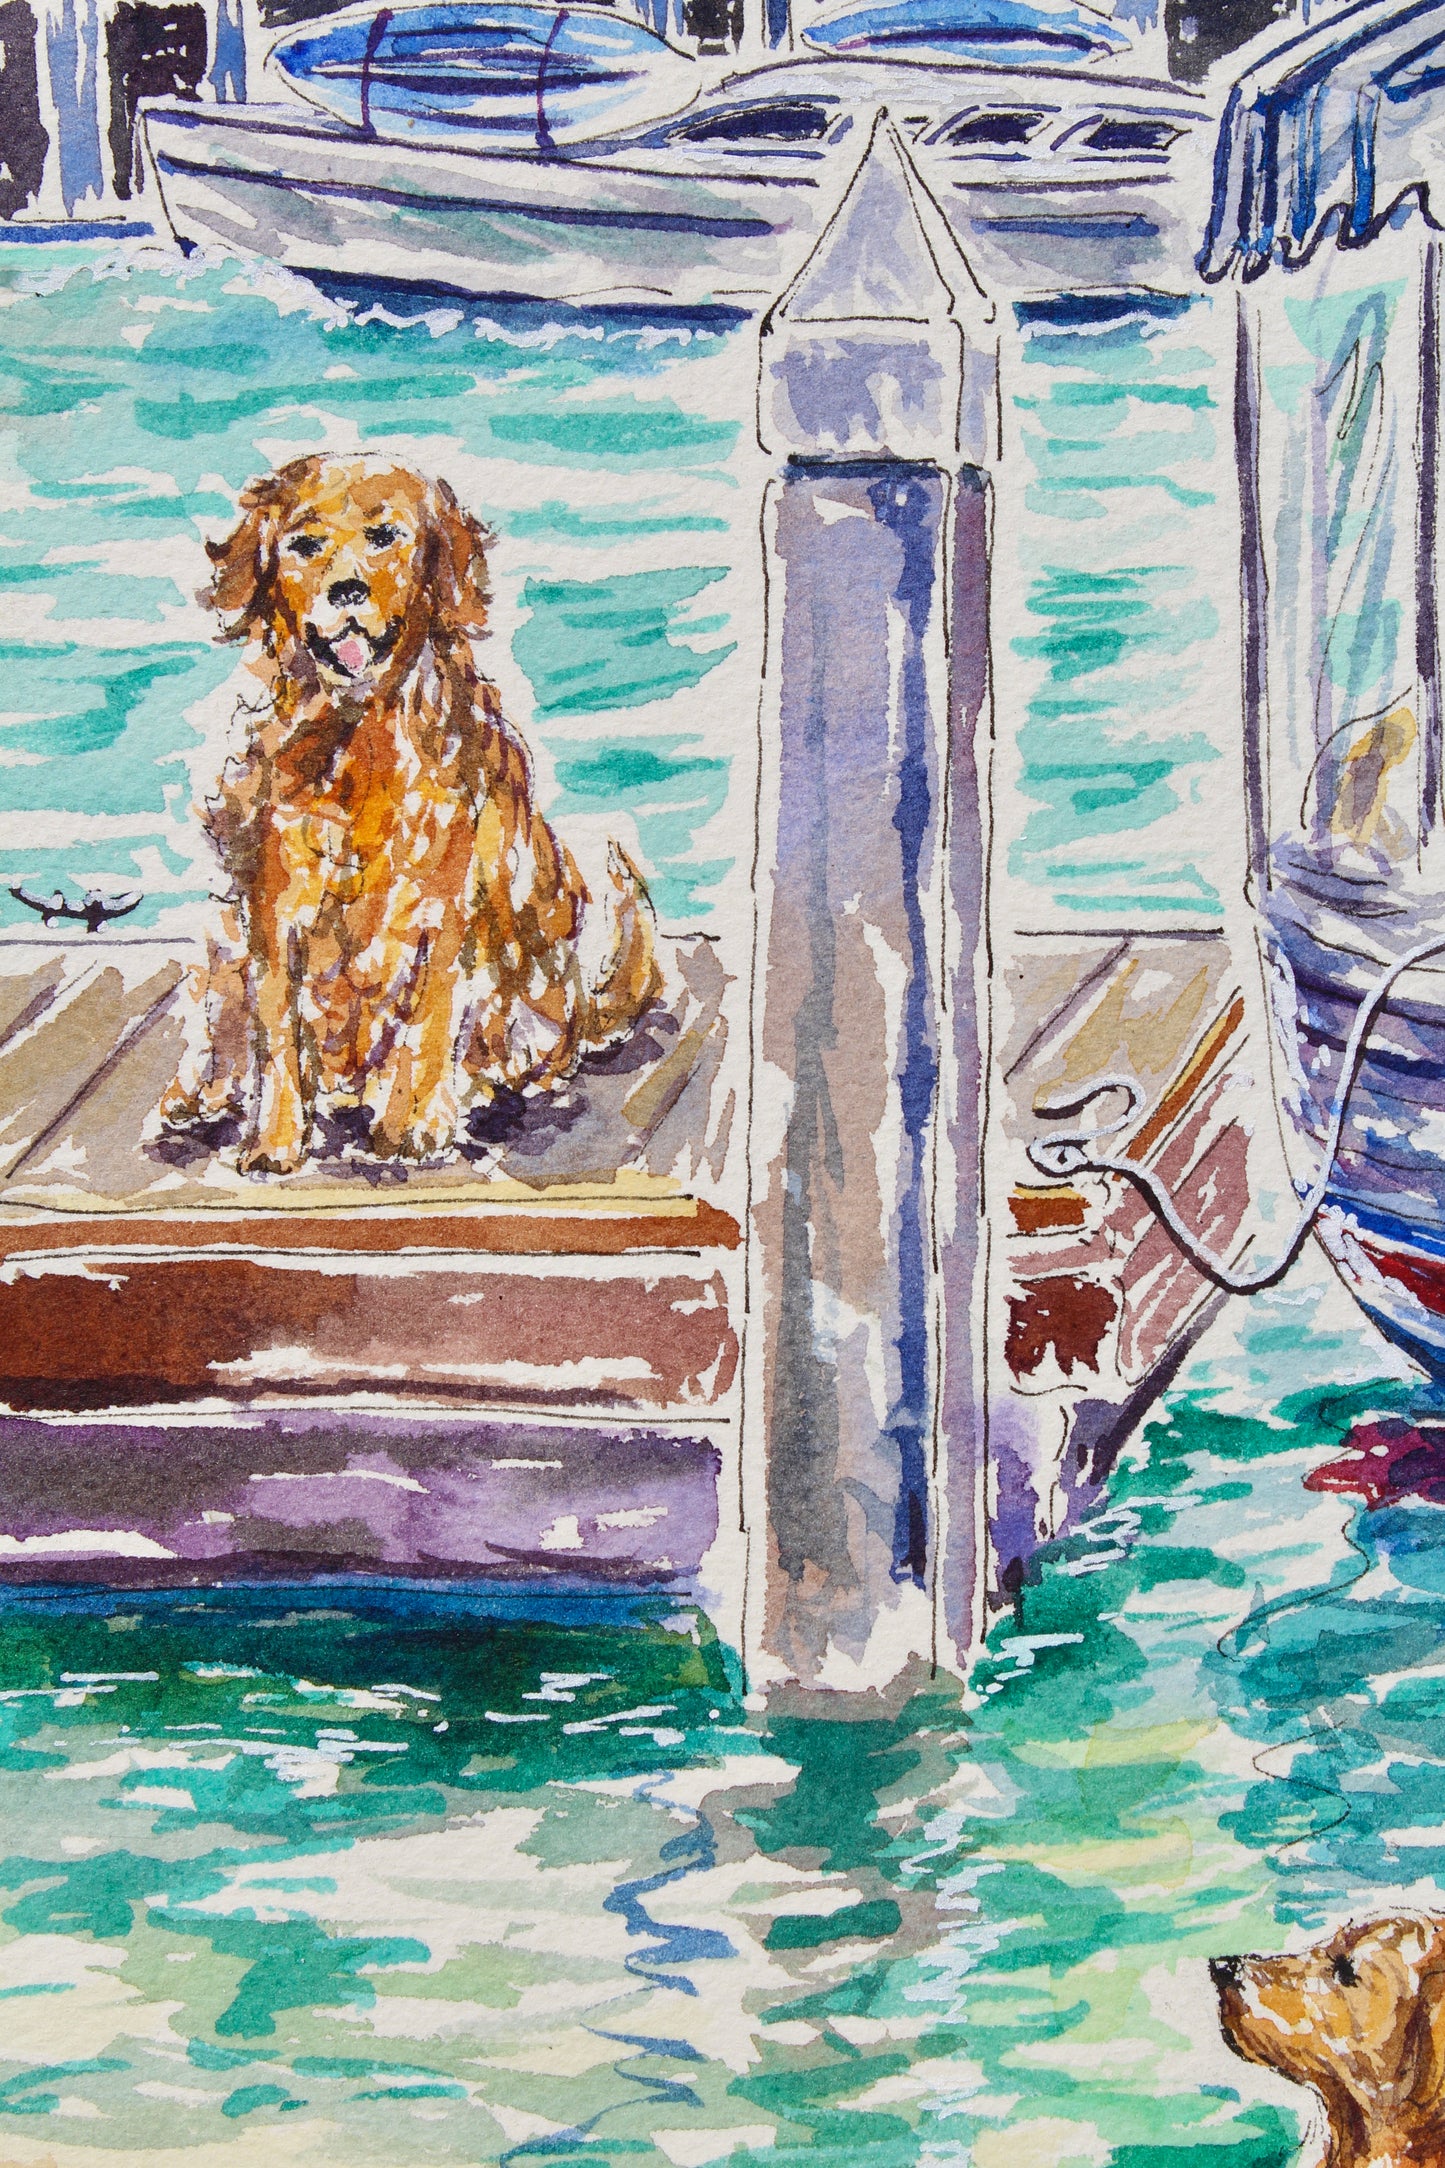 It's A Dog's Day On Balboa, An Original 14" x 10" Watercolor And Ink Painting Of Golden Retrievers, Duffy Boats And The Balboa Pavillion